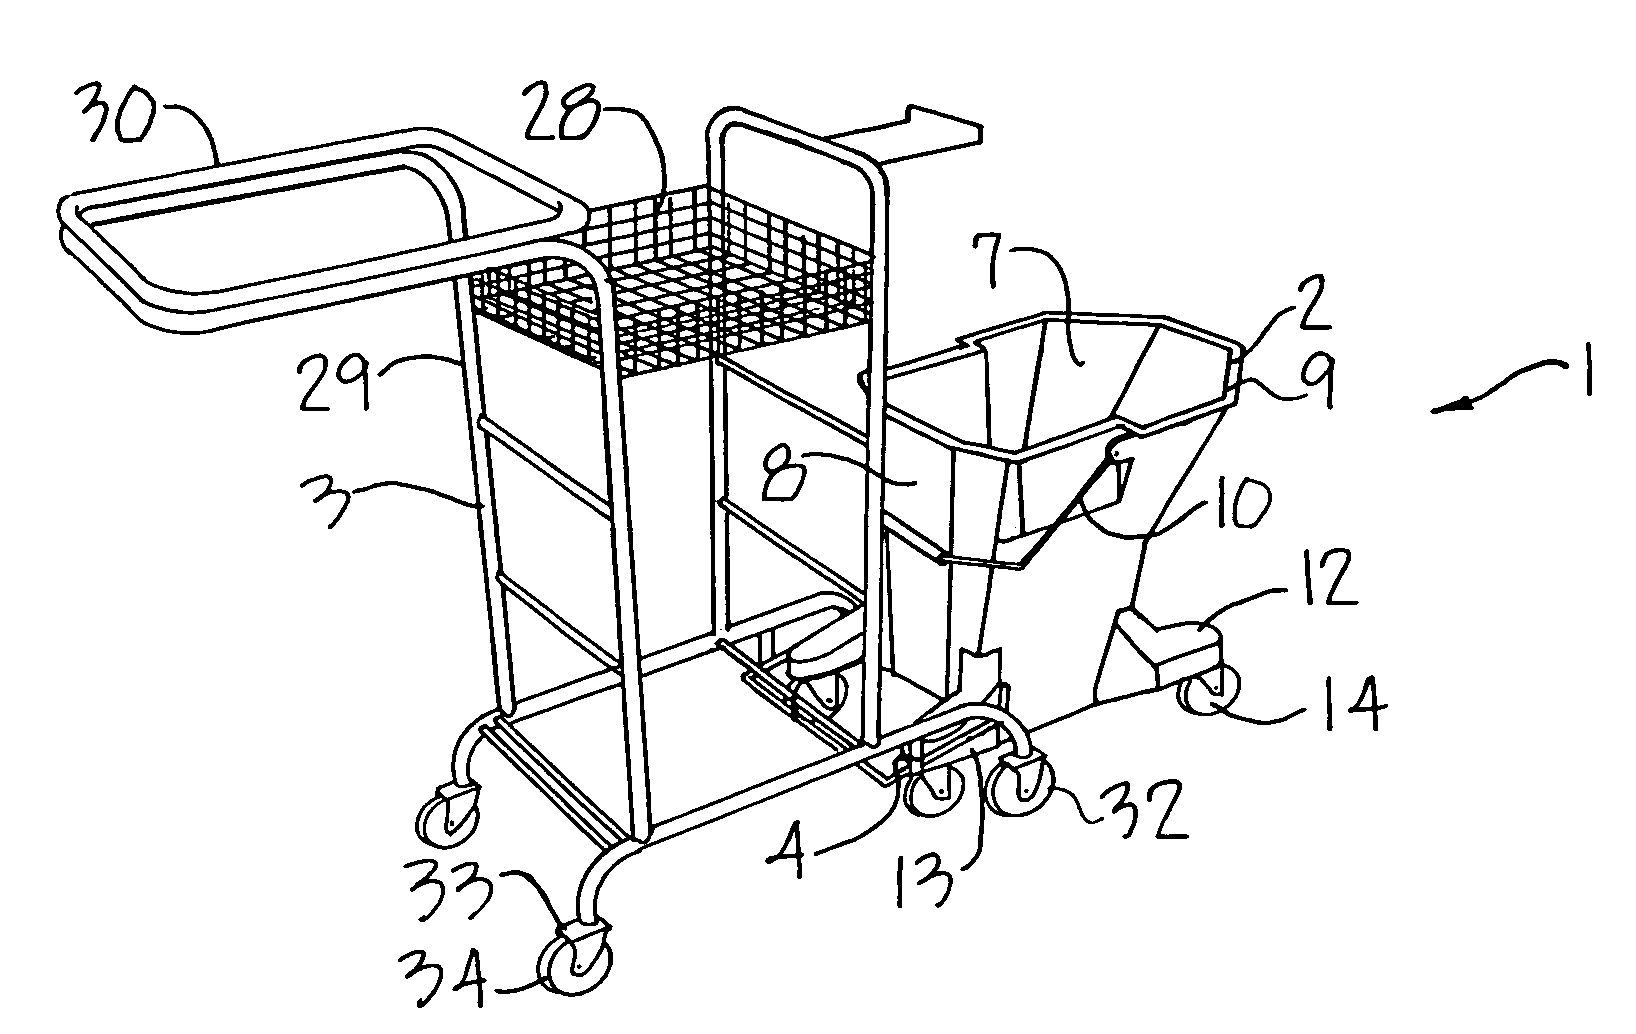 Combination mop bucket and trolley